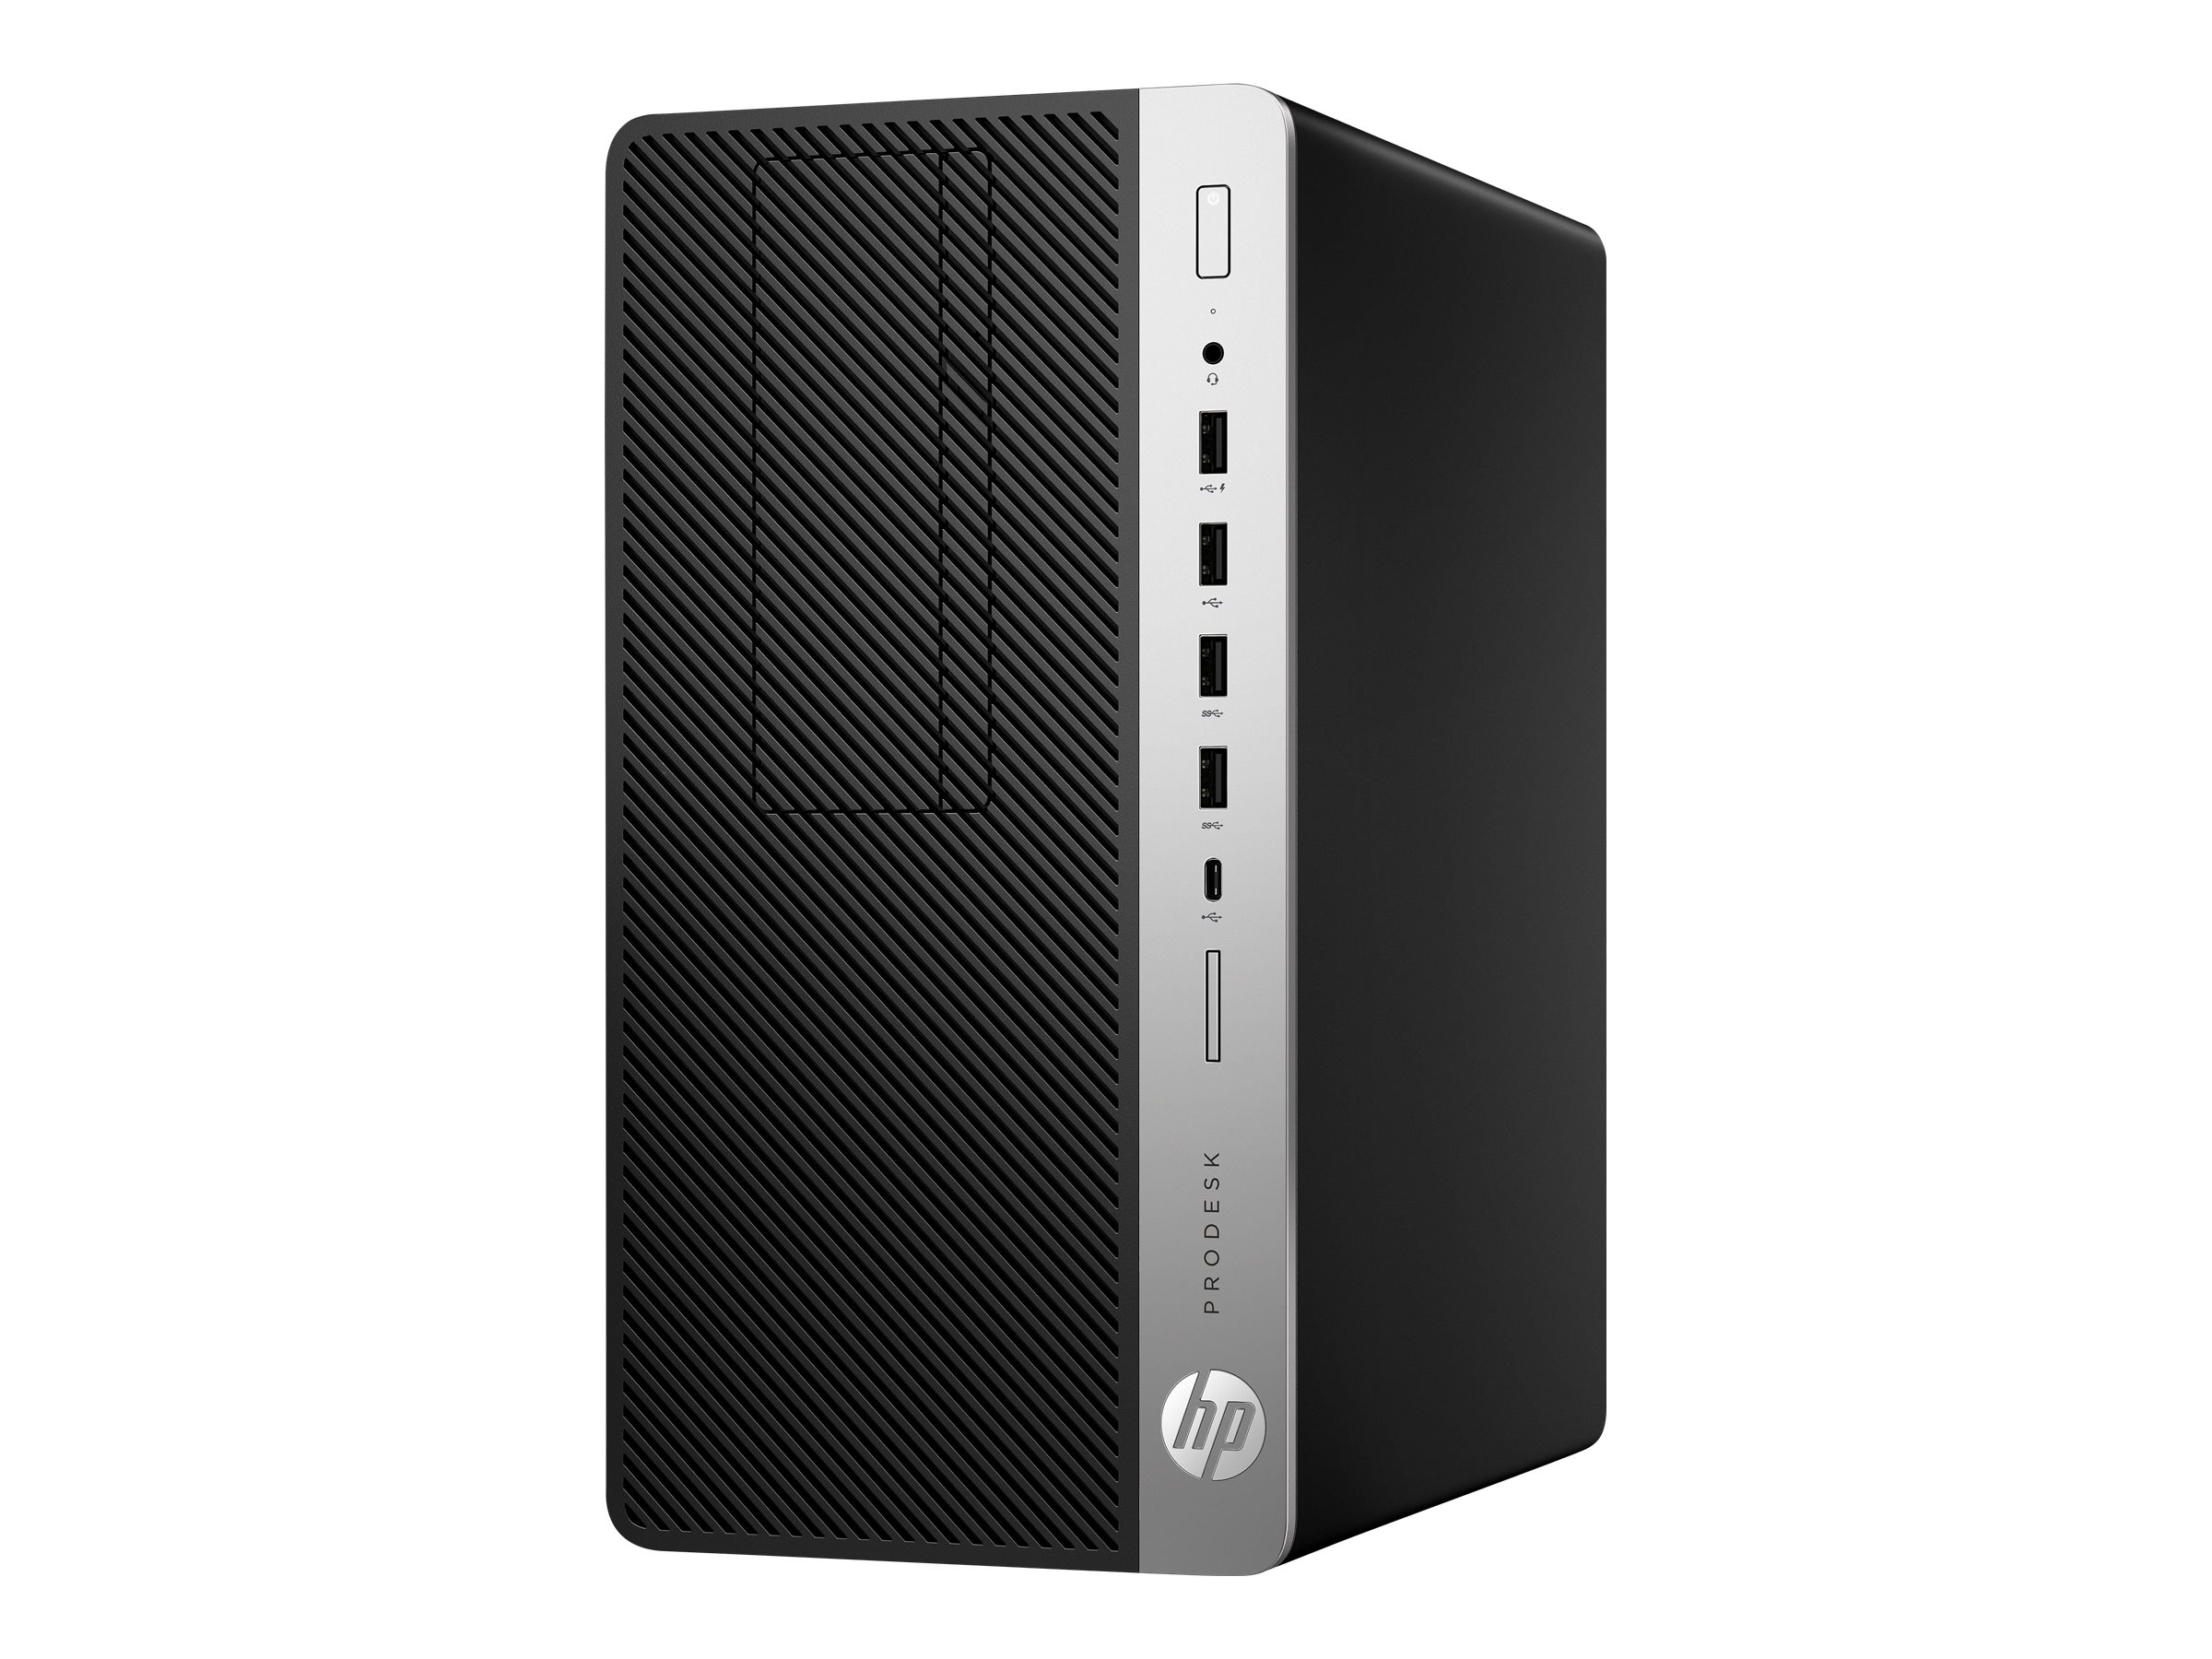 ProDesk 600 G3 Microtower PC